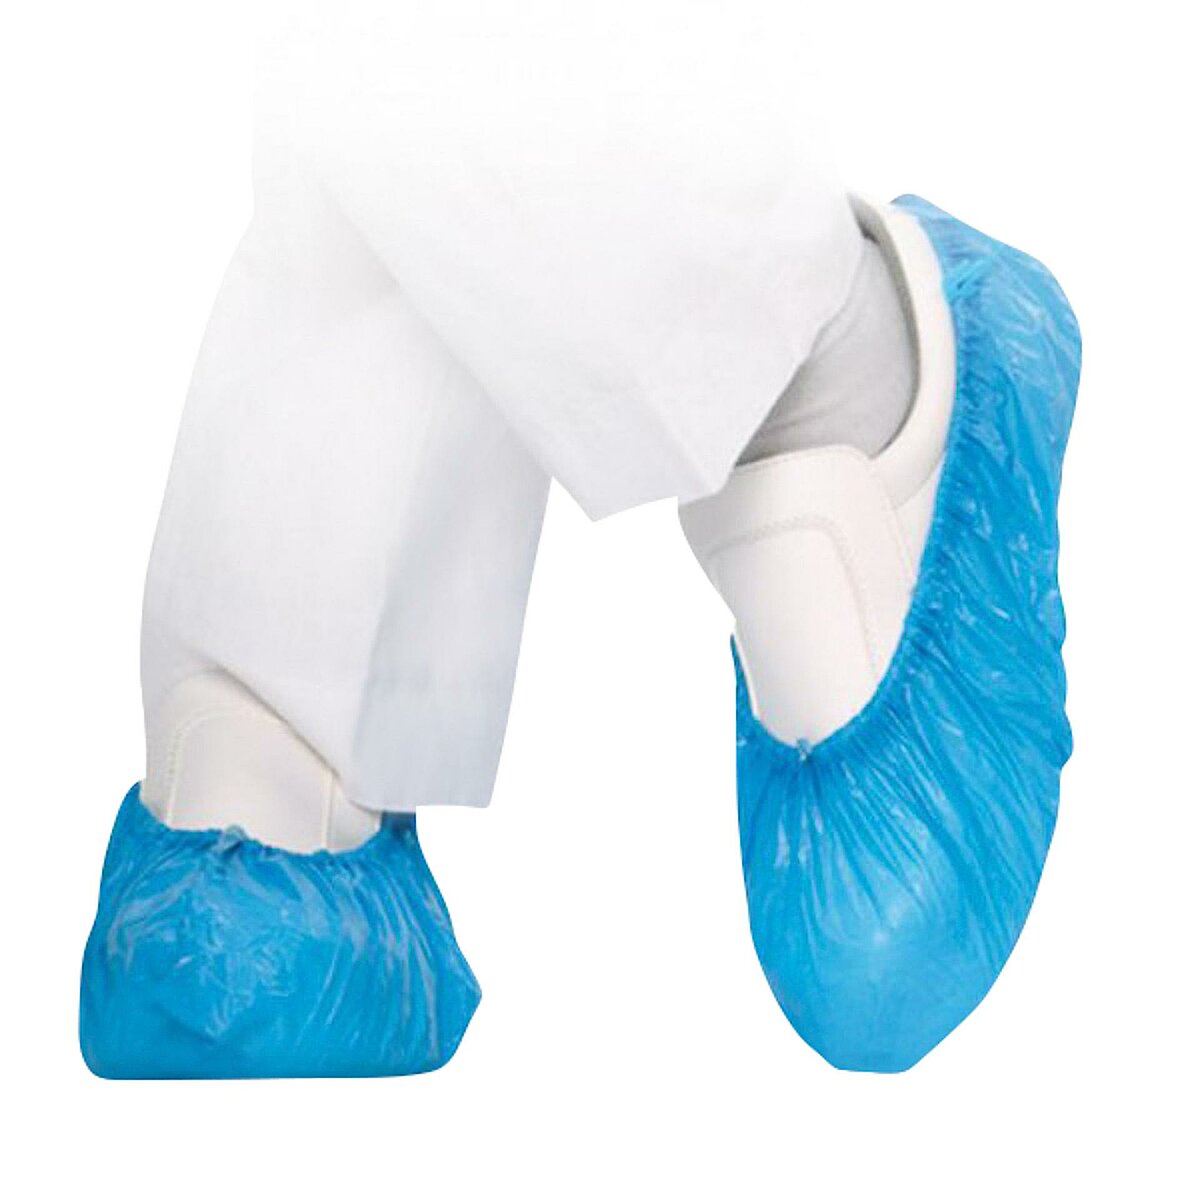 Cleanroom disposable overshoe CPE for overshoe dispensers made of CPE